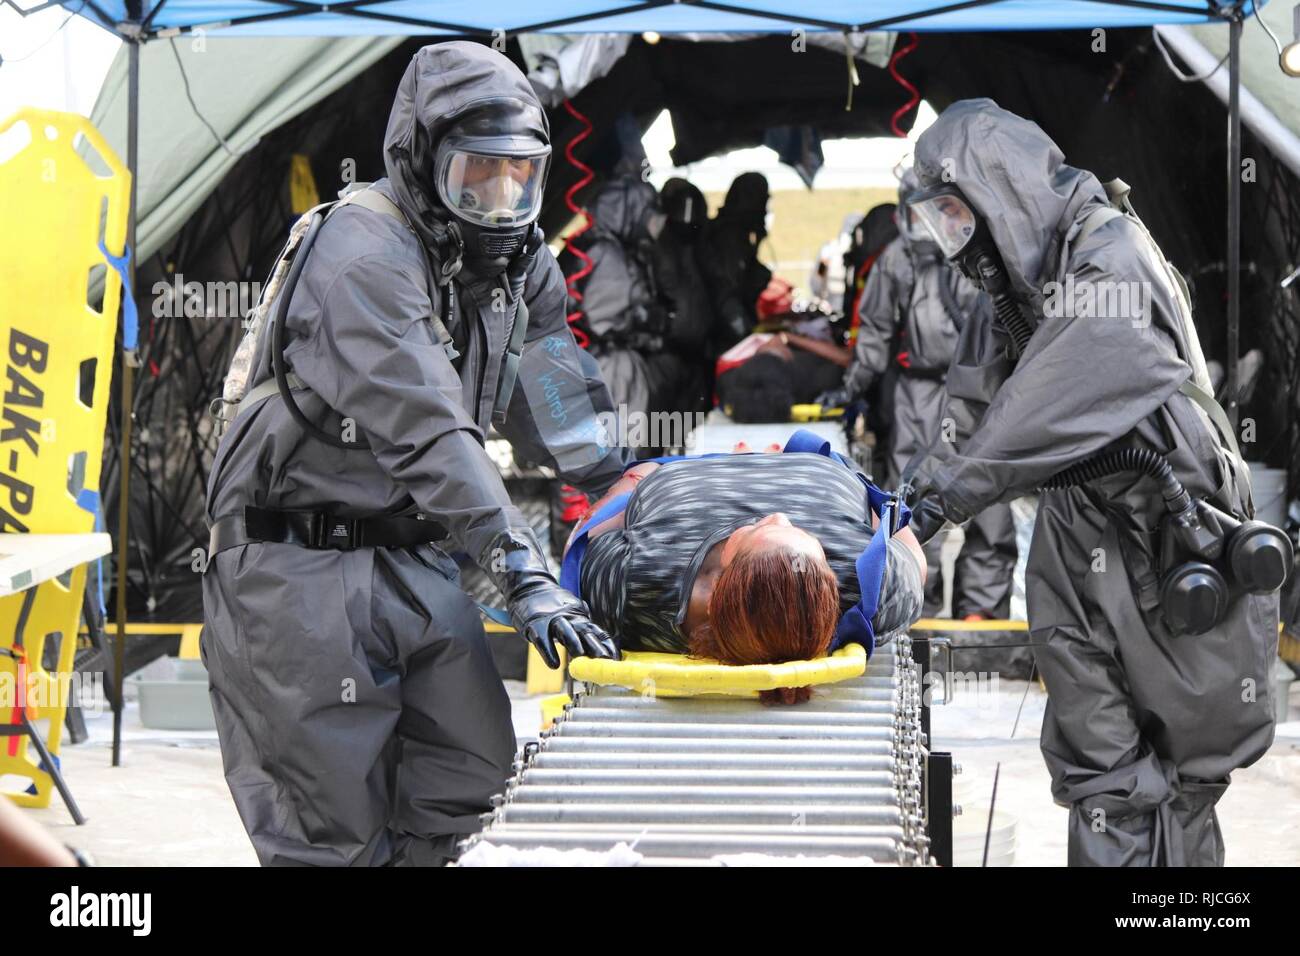 Soldiers assigned to the 409th Area Support Medical Company, Madison, Wisconsin transport simulated casualties during a Joint Training Exercise hosted by the Homestead-Miami Speedway and Miami-Dade Fire Department in Miami, Florida. Jan. 11, 2018. This JTE focused on building response capabilities and the seamless transition between the local first responders and the follow-on support provided by the National Guard and Active duty soldiers. (U. S. Army Stock Photo